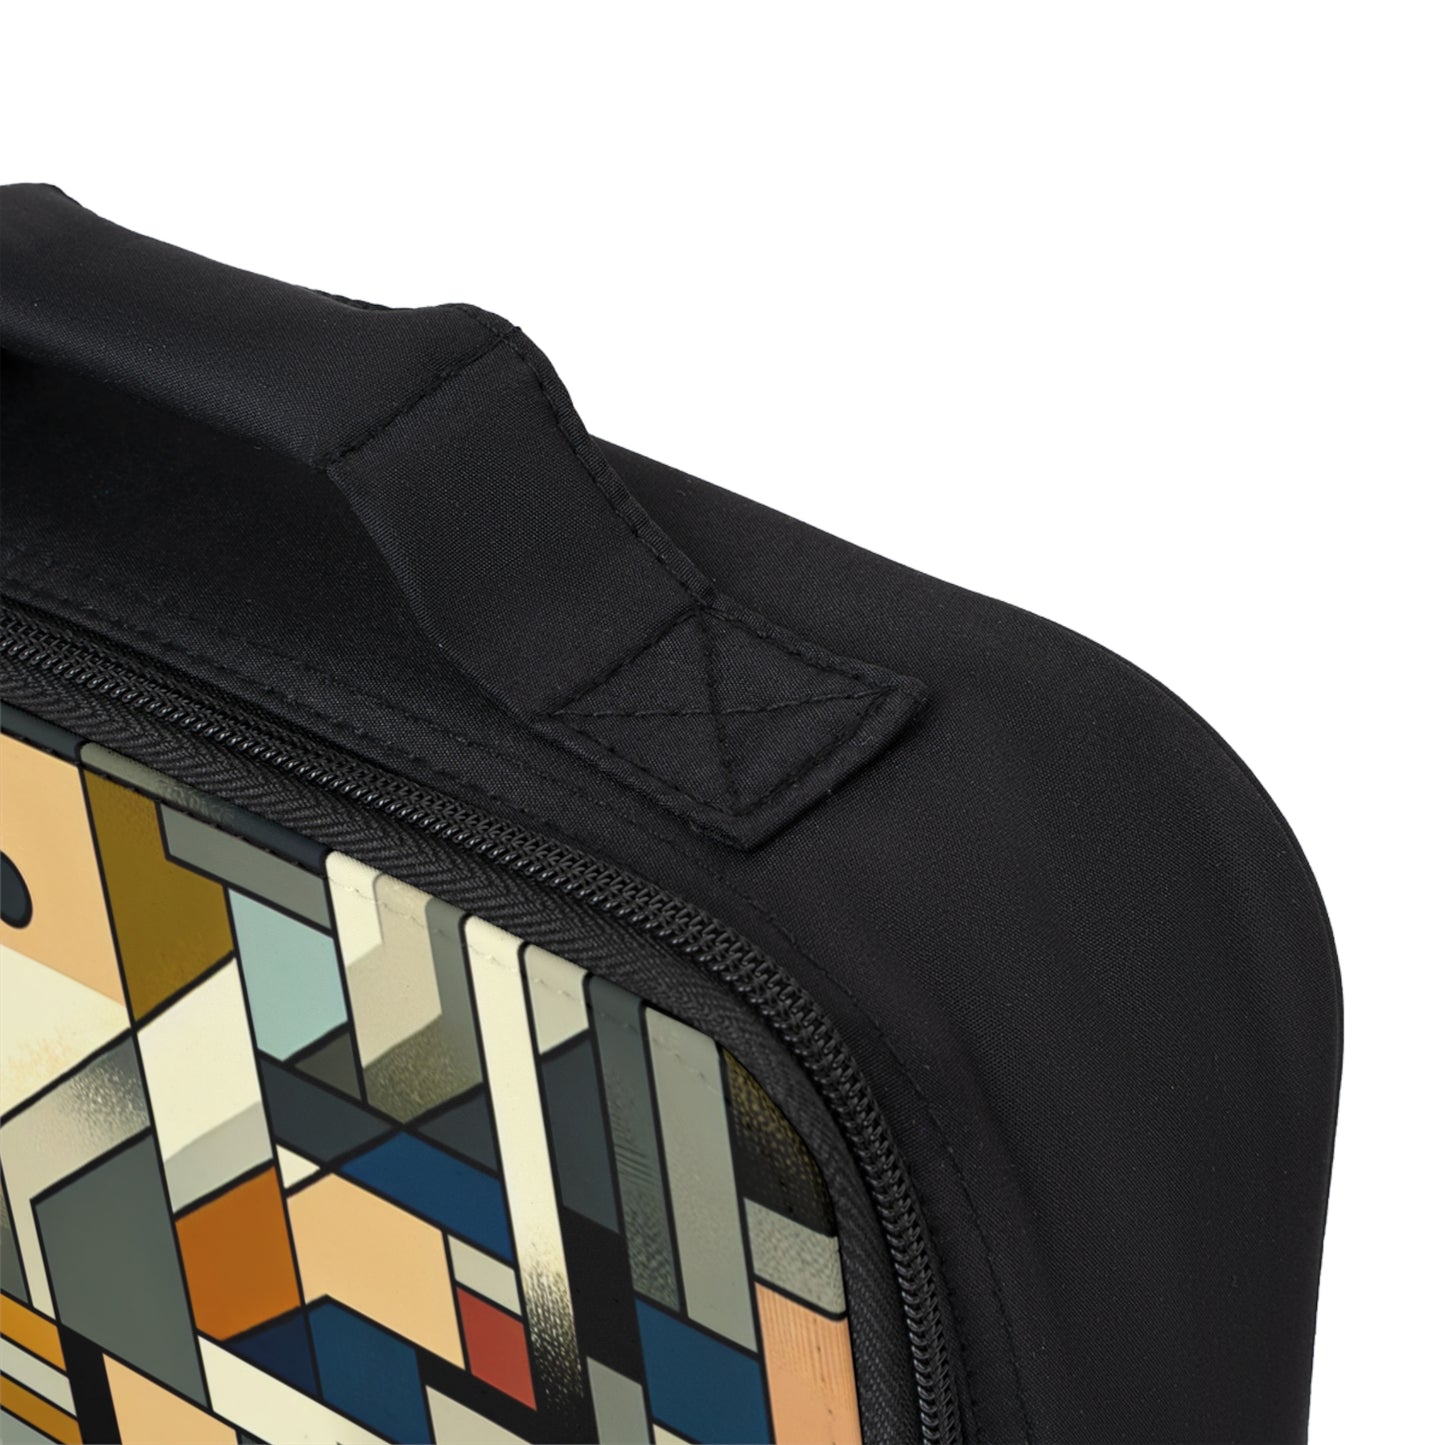 "Cubist Cityscape: Urban Energy"- The Alien Lunch Bag Synthetic Cubism